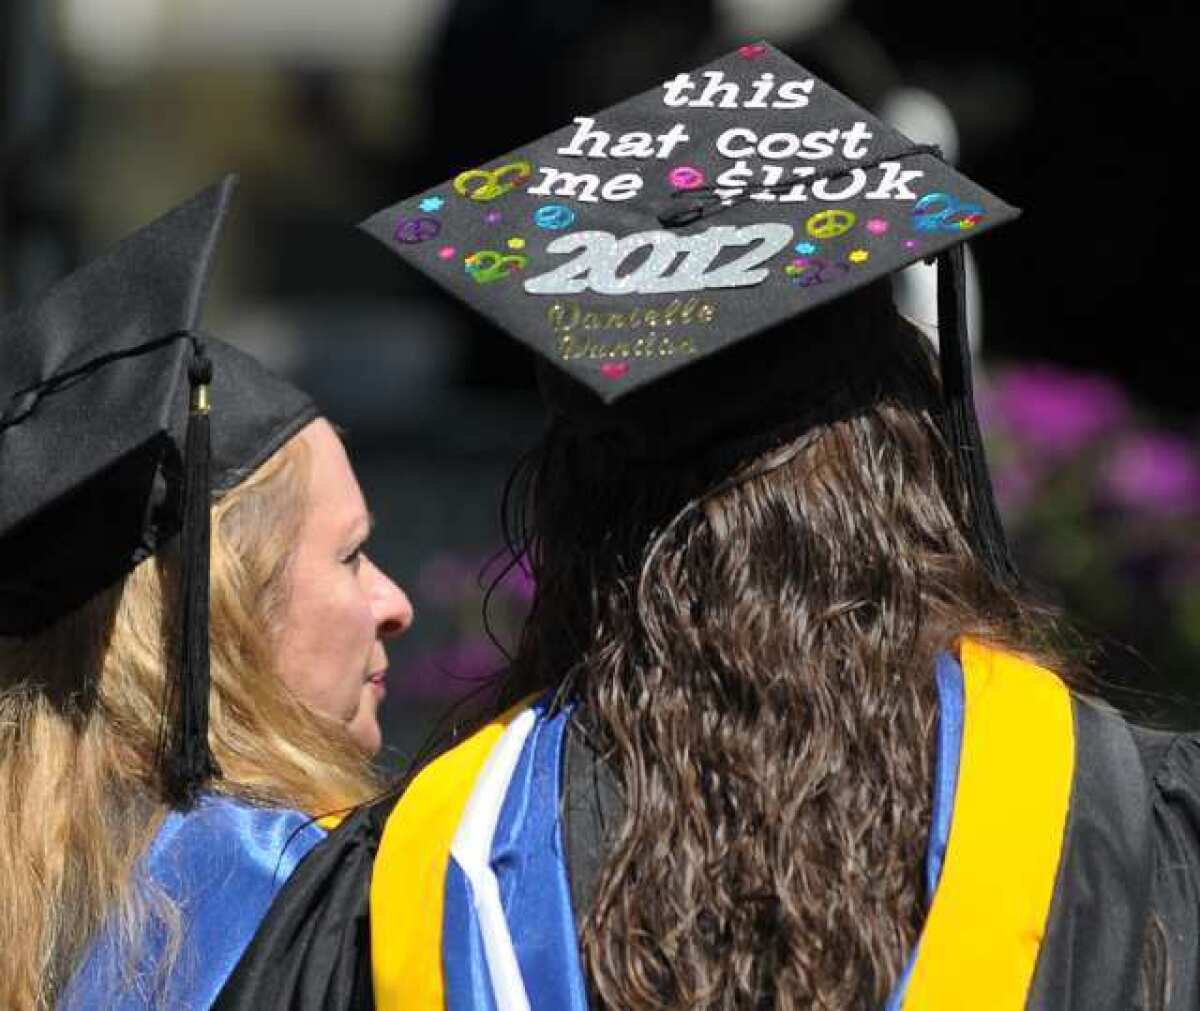 California's 529 college-savings plan is one of the nation's best, according to research firm Morningstar Inc.